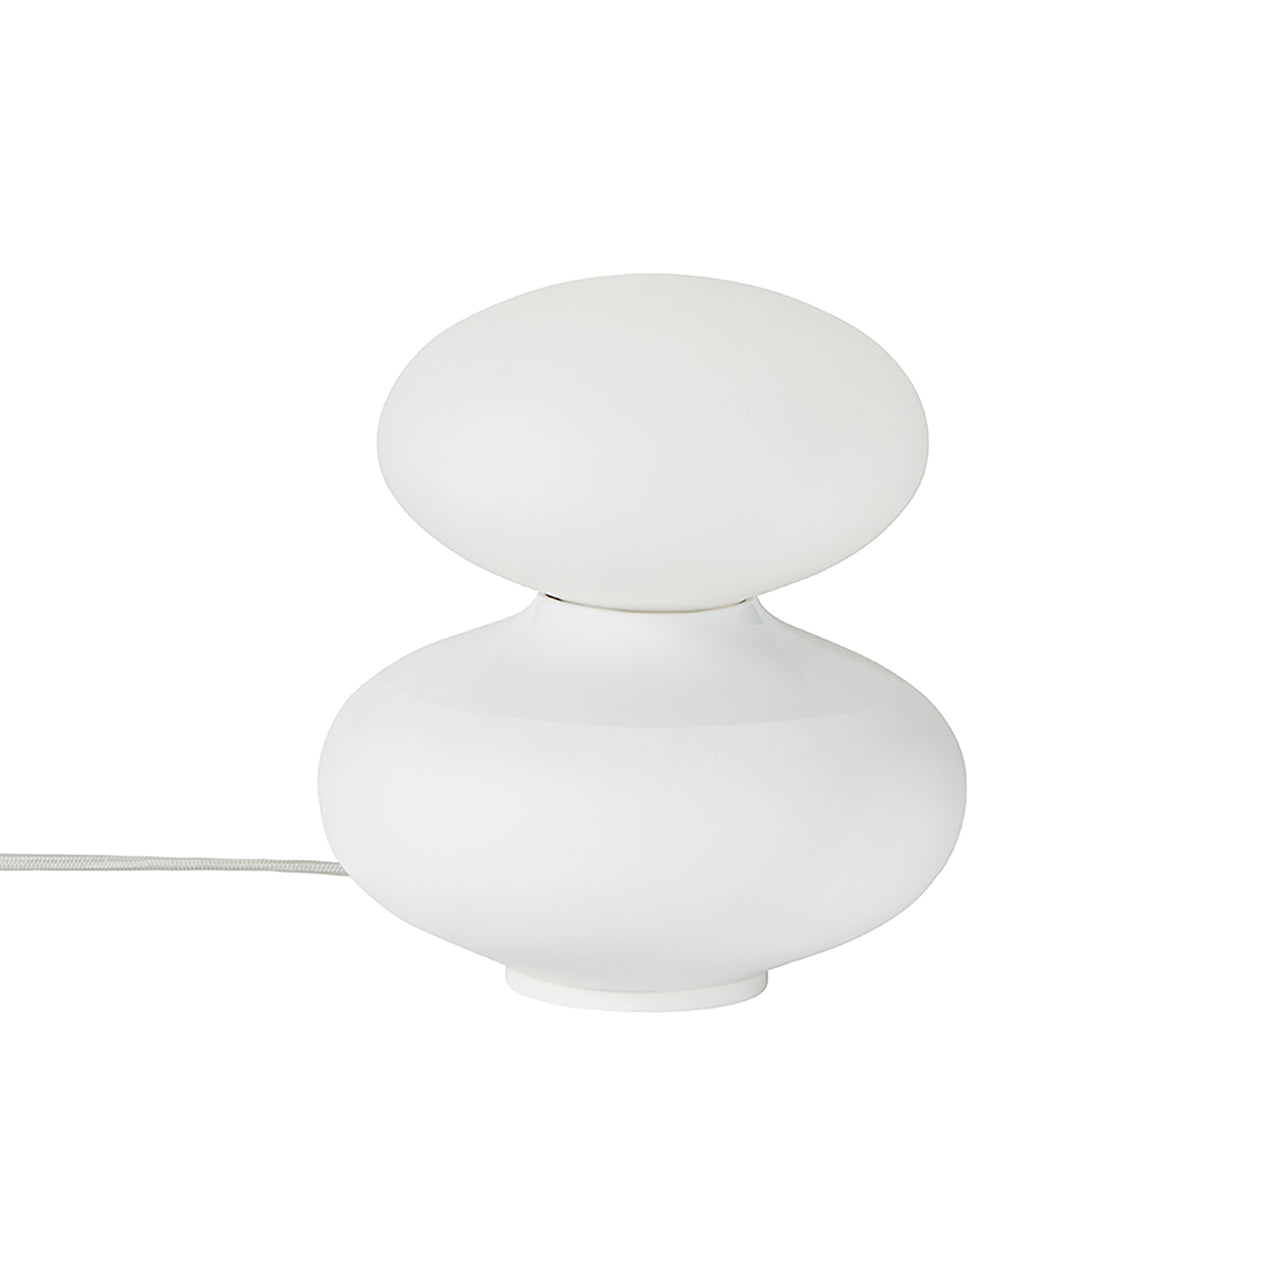 Reflection Table Lamp: Oval